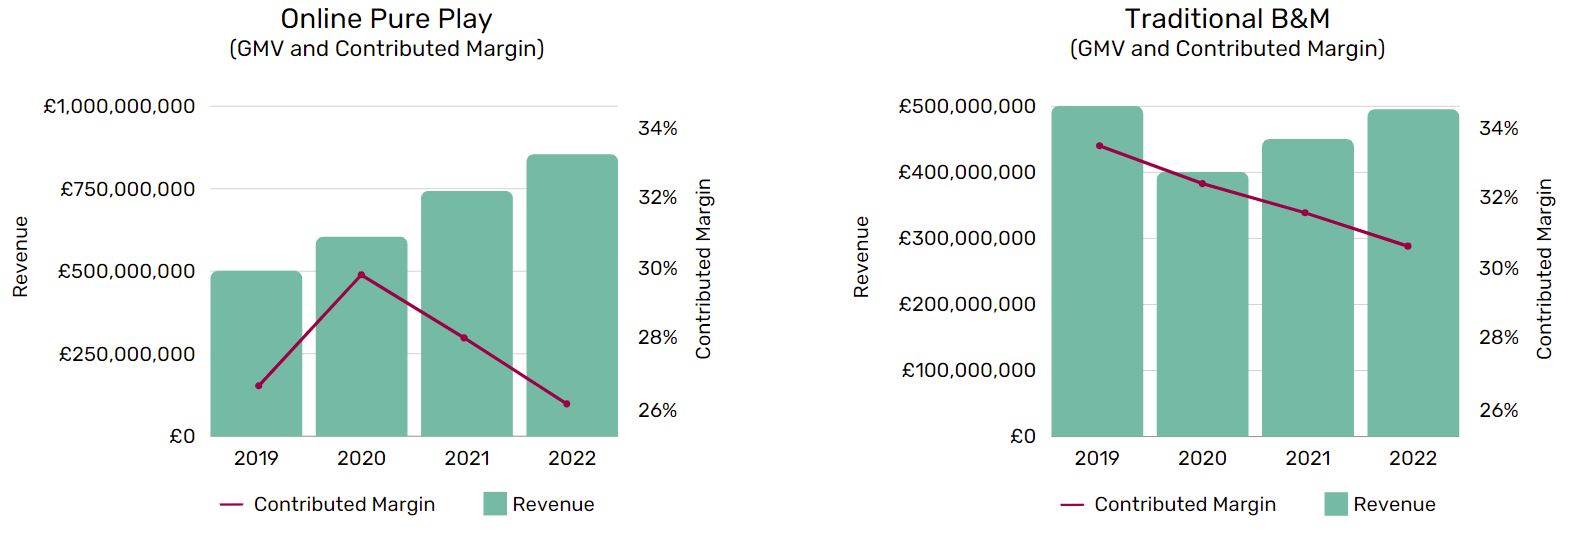 Online pure play versus traditional bricks and mortar revenue and contributed margins between 2019 and 2022